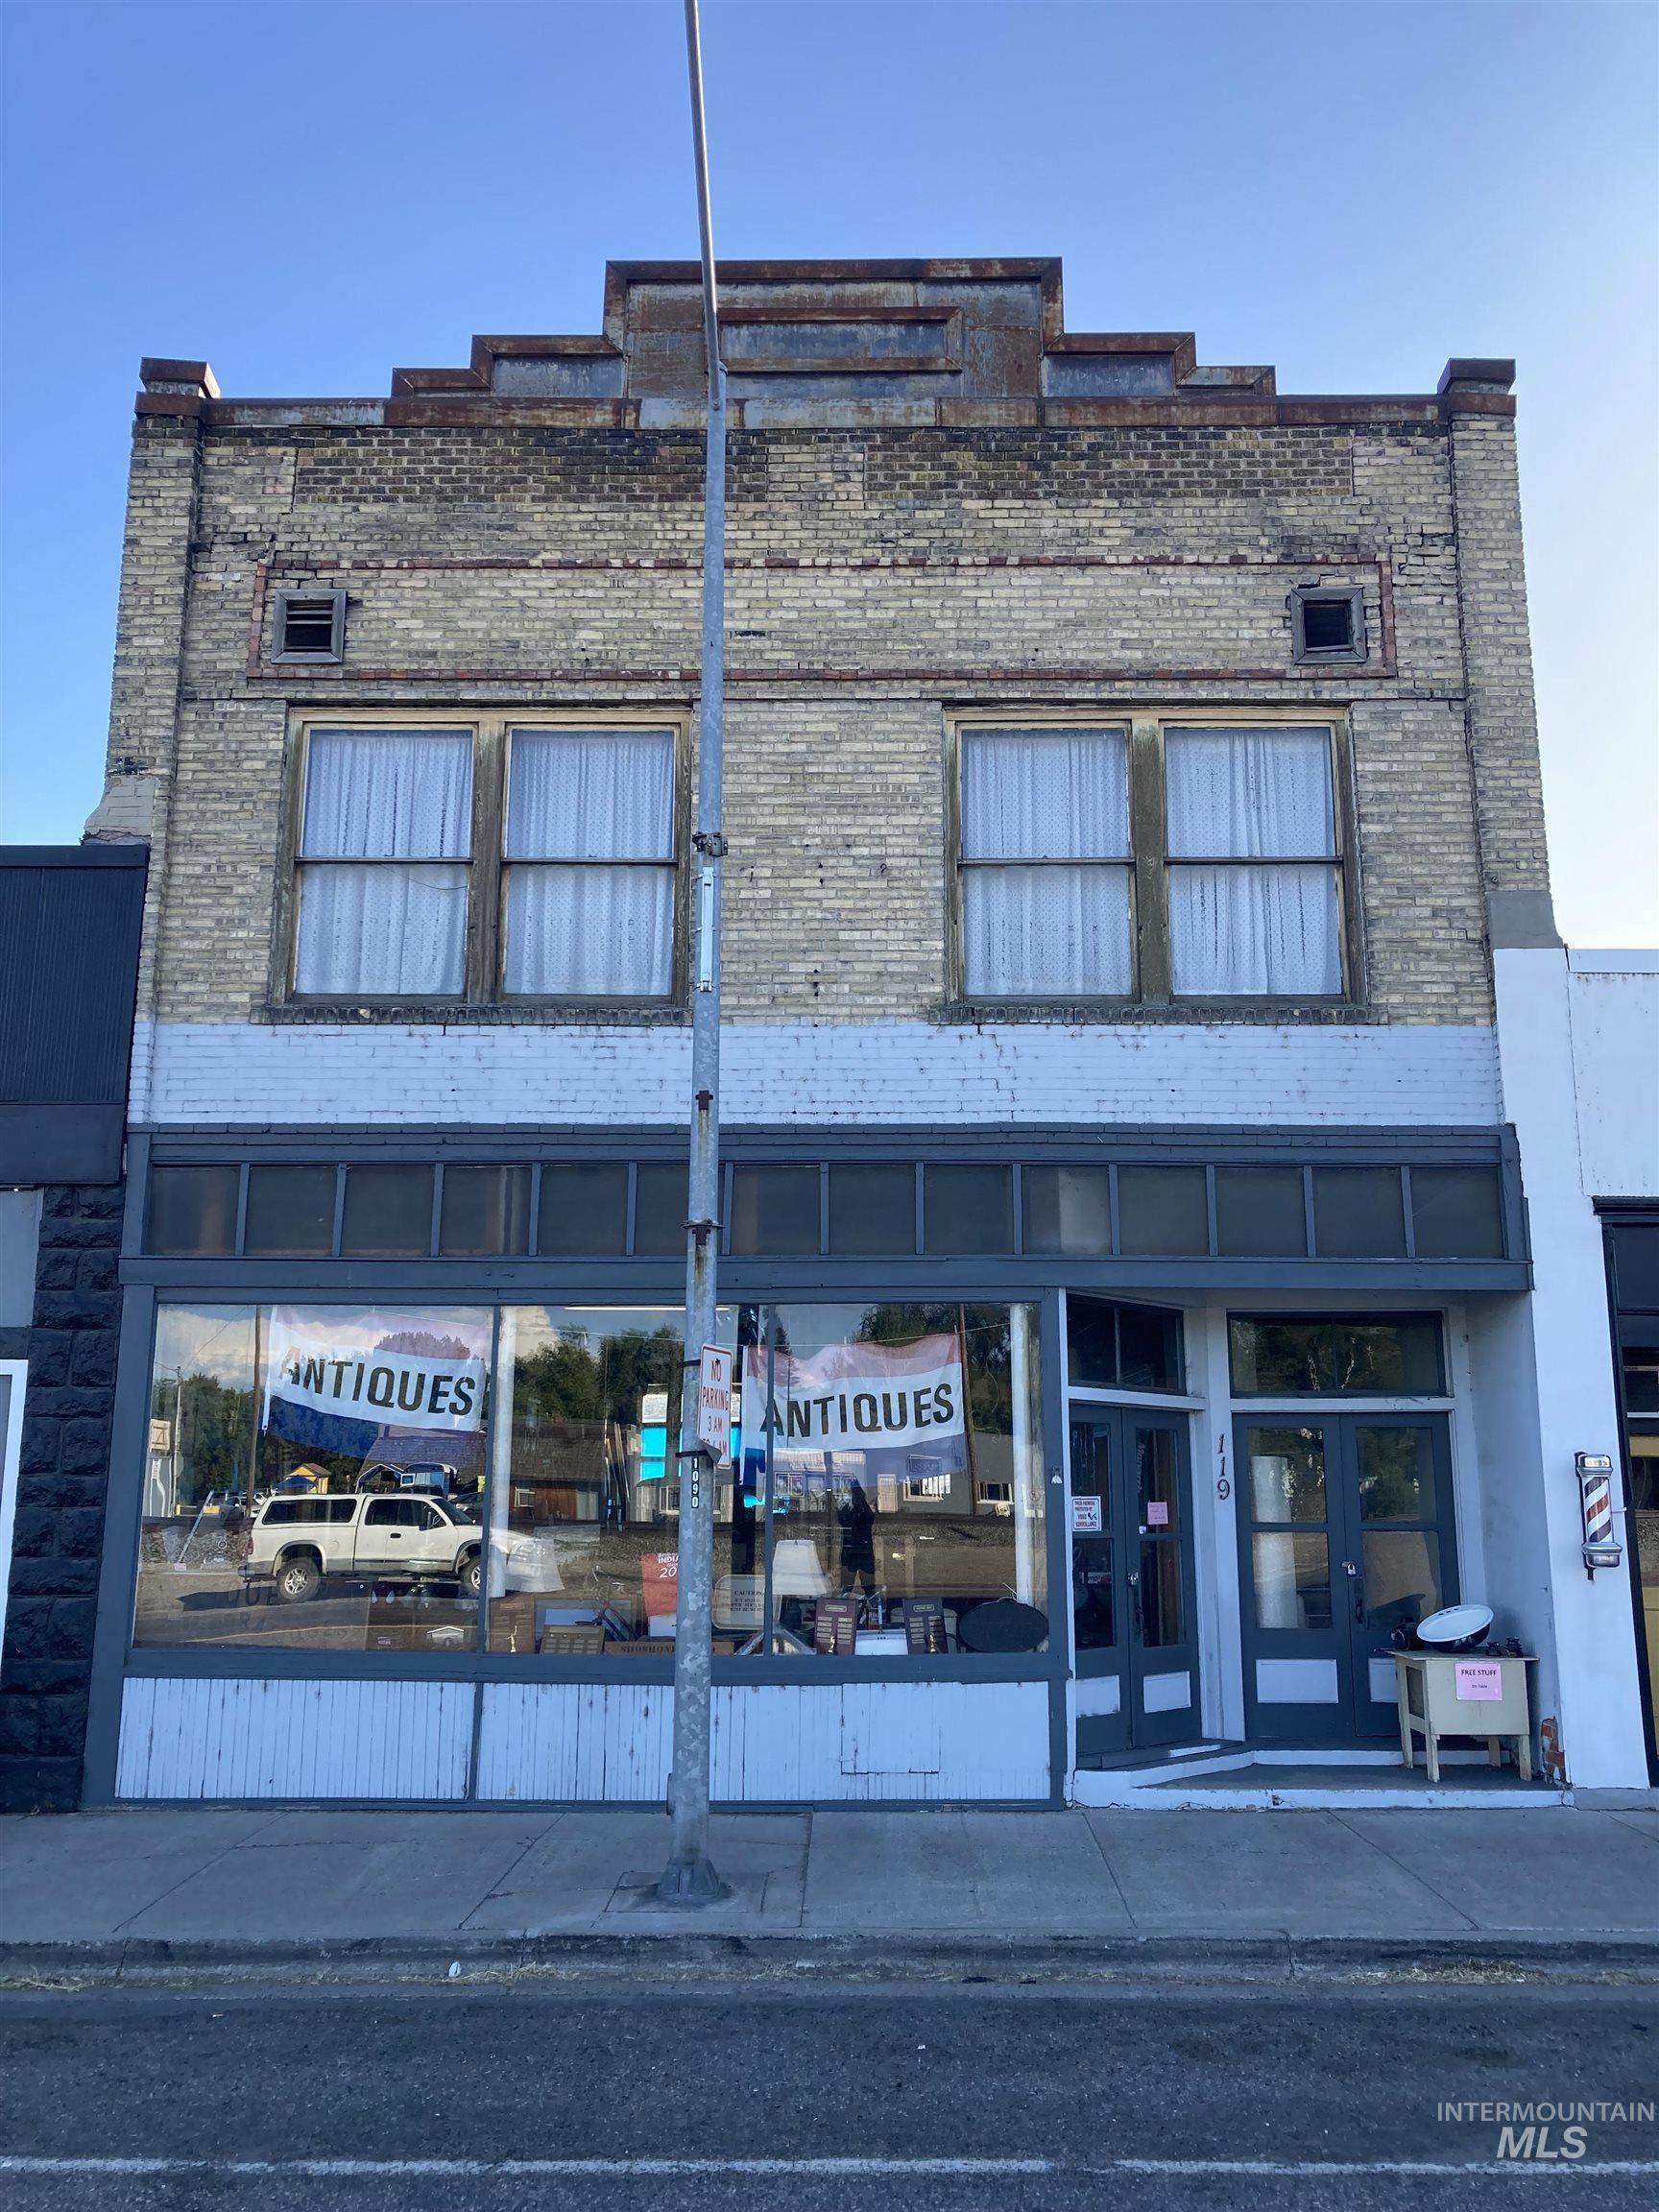 119 S Rail St. W, Shoshone, Idaho 83352, Business/Commercial For Sale, Price $185,000,MLS 98889402